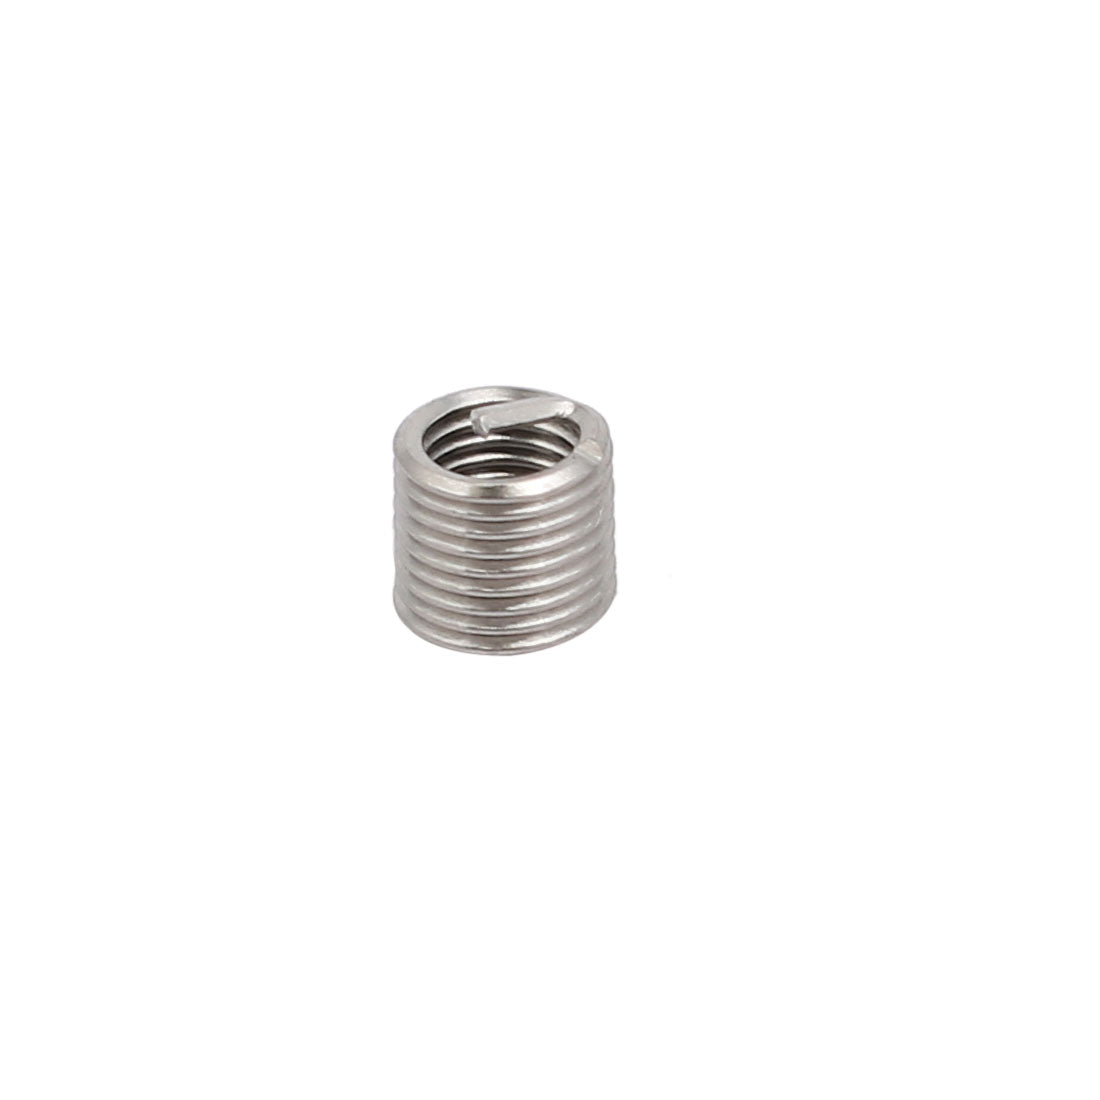 uxcell Uxcell M3x0.5mmx6mm 304 Stainless Steel Helical Coil Wire Thread Insert 25pcs